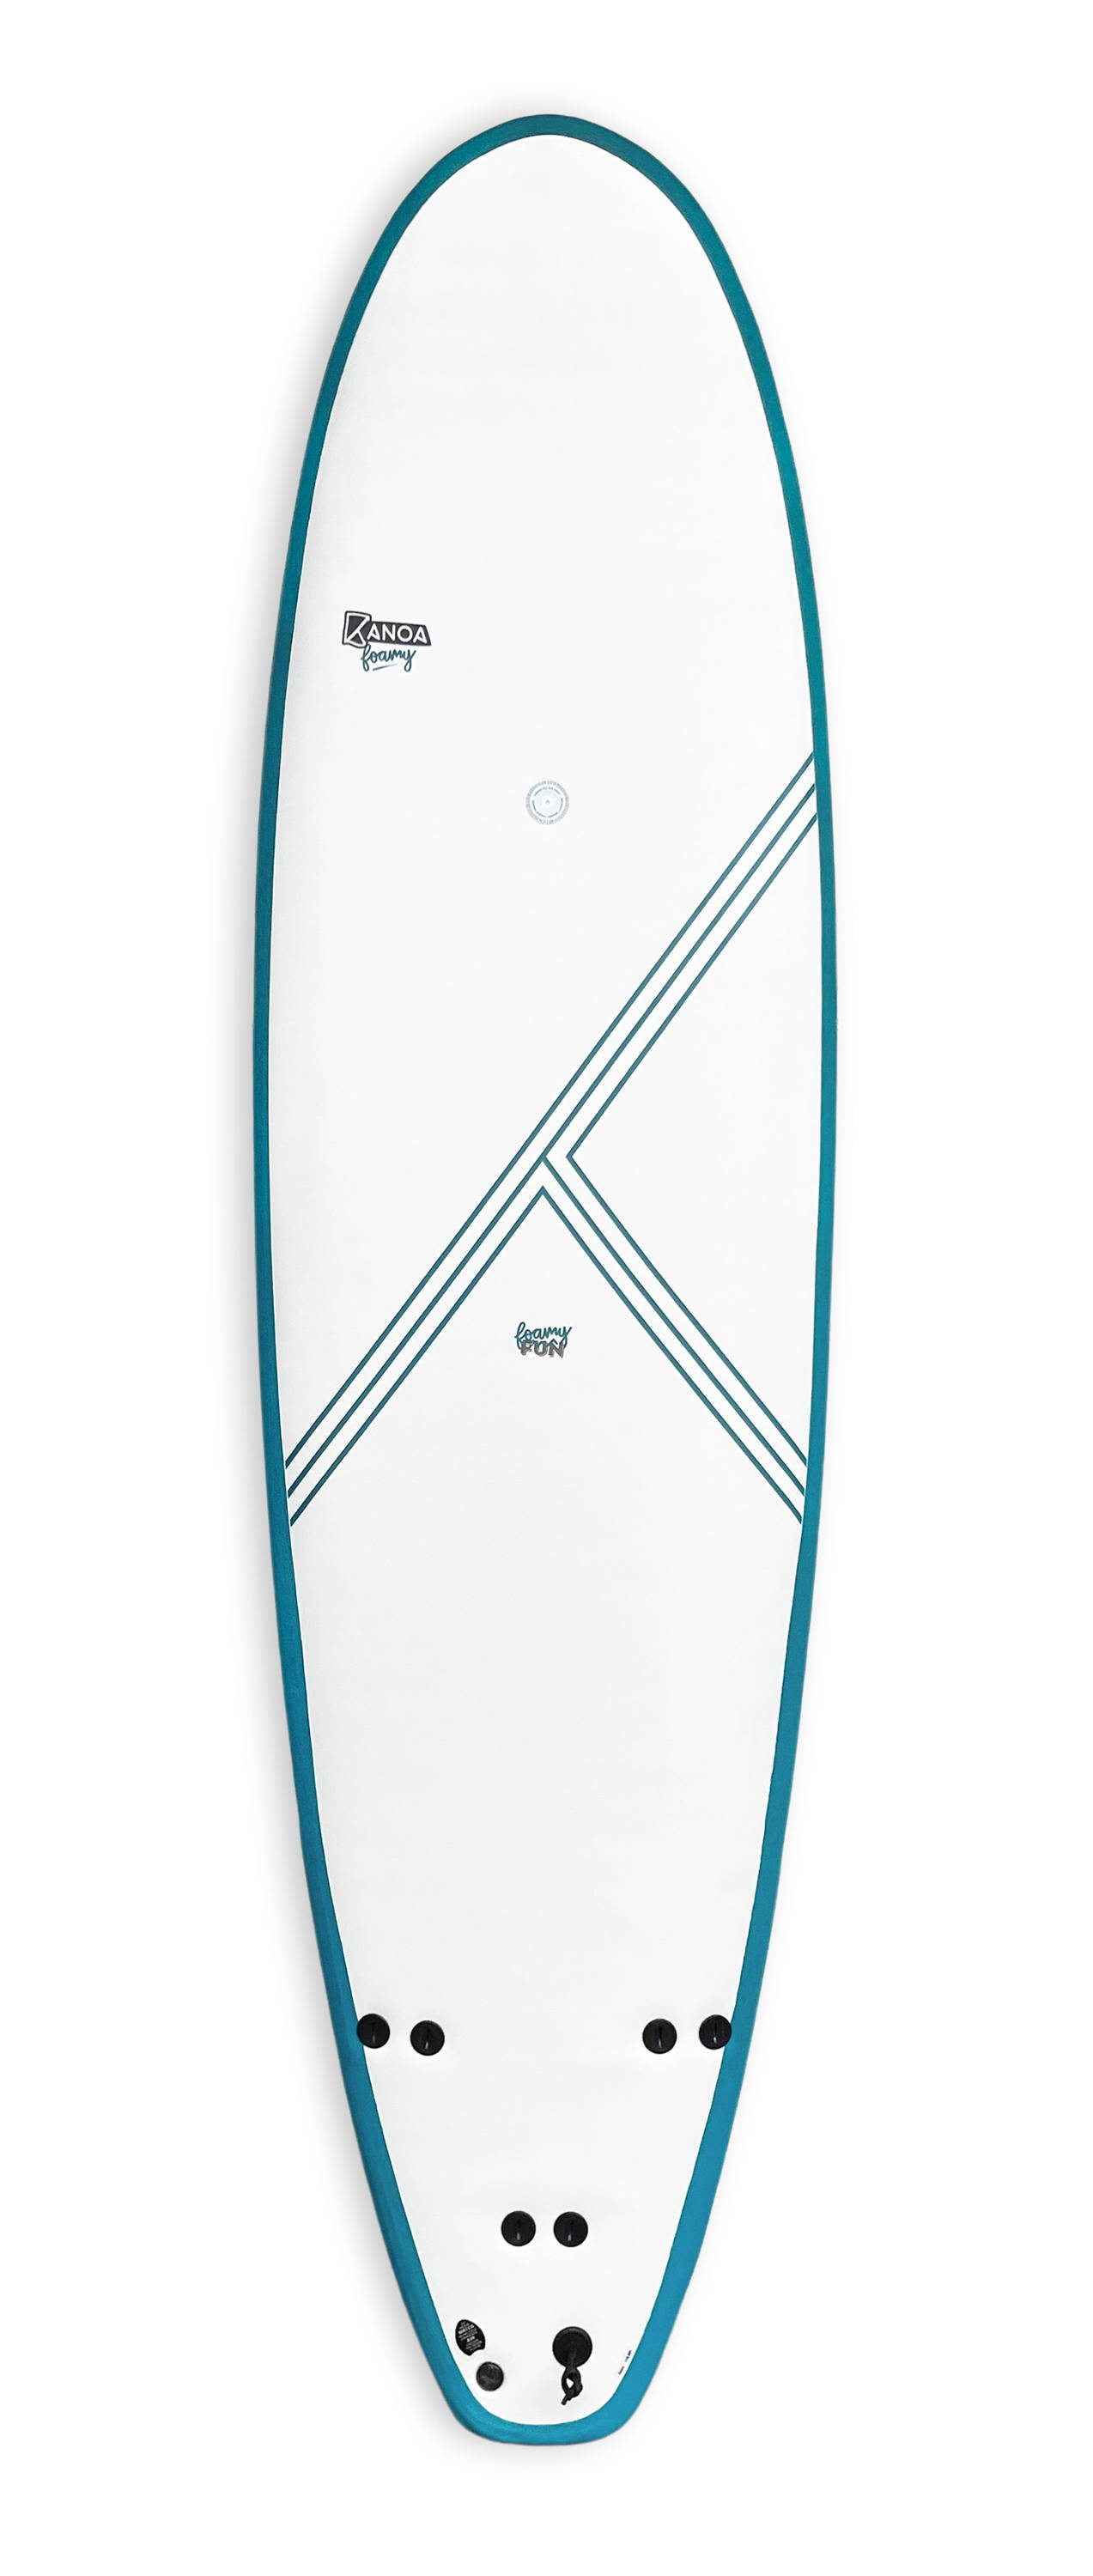 Discover our beginner-friendly softtop foamie Surfboard 